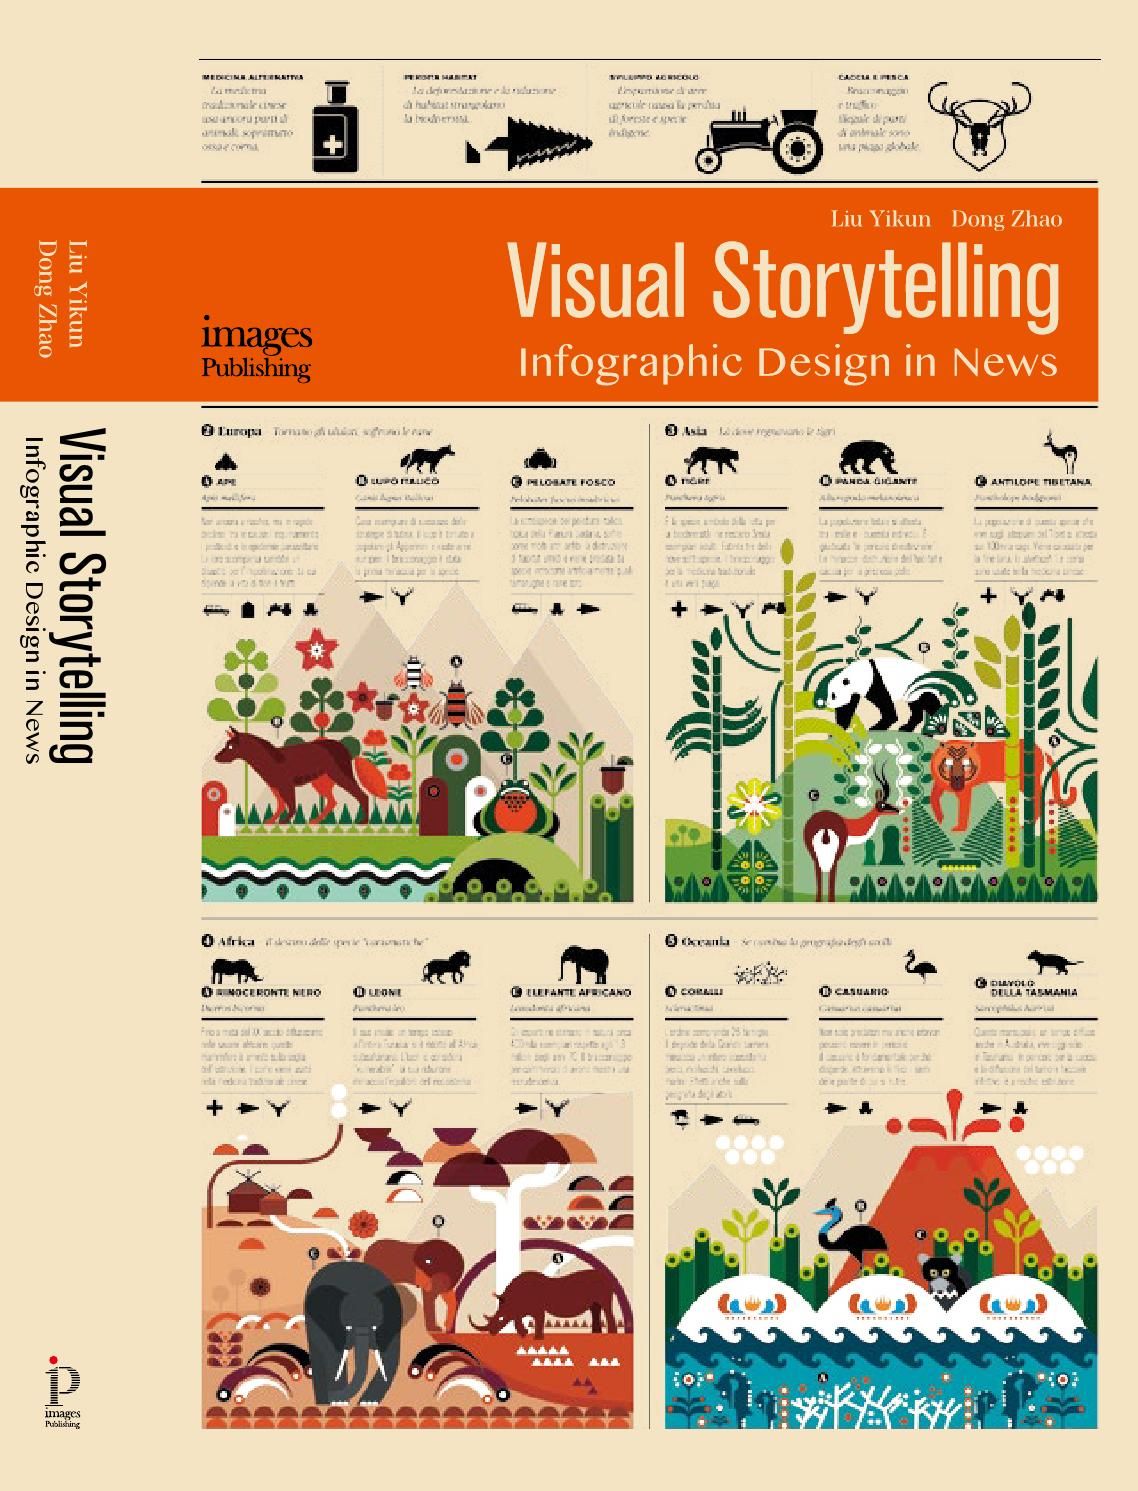 VISUAL STORYTELLING - Infographic Design In News